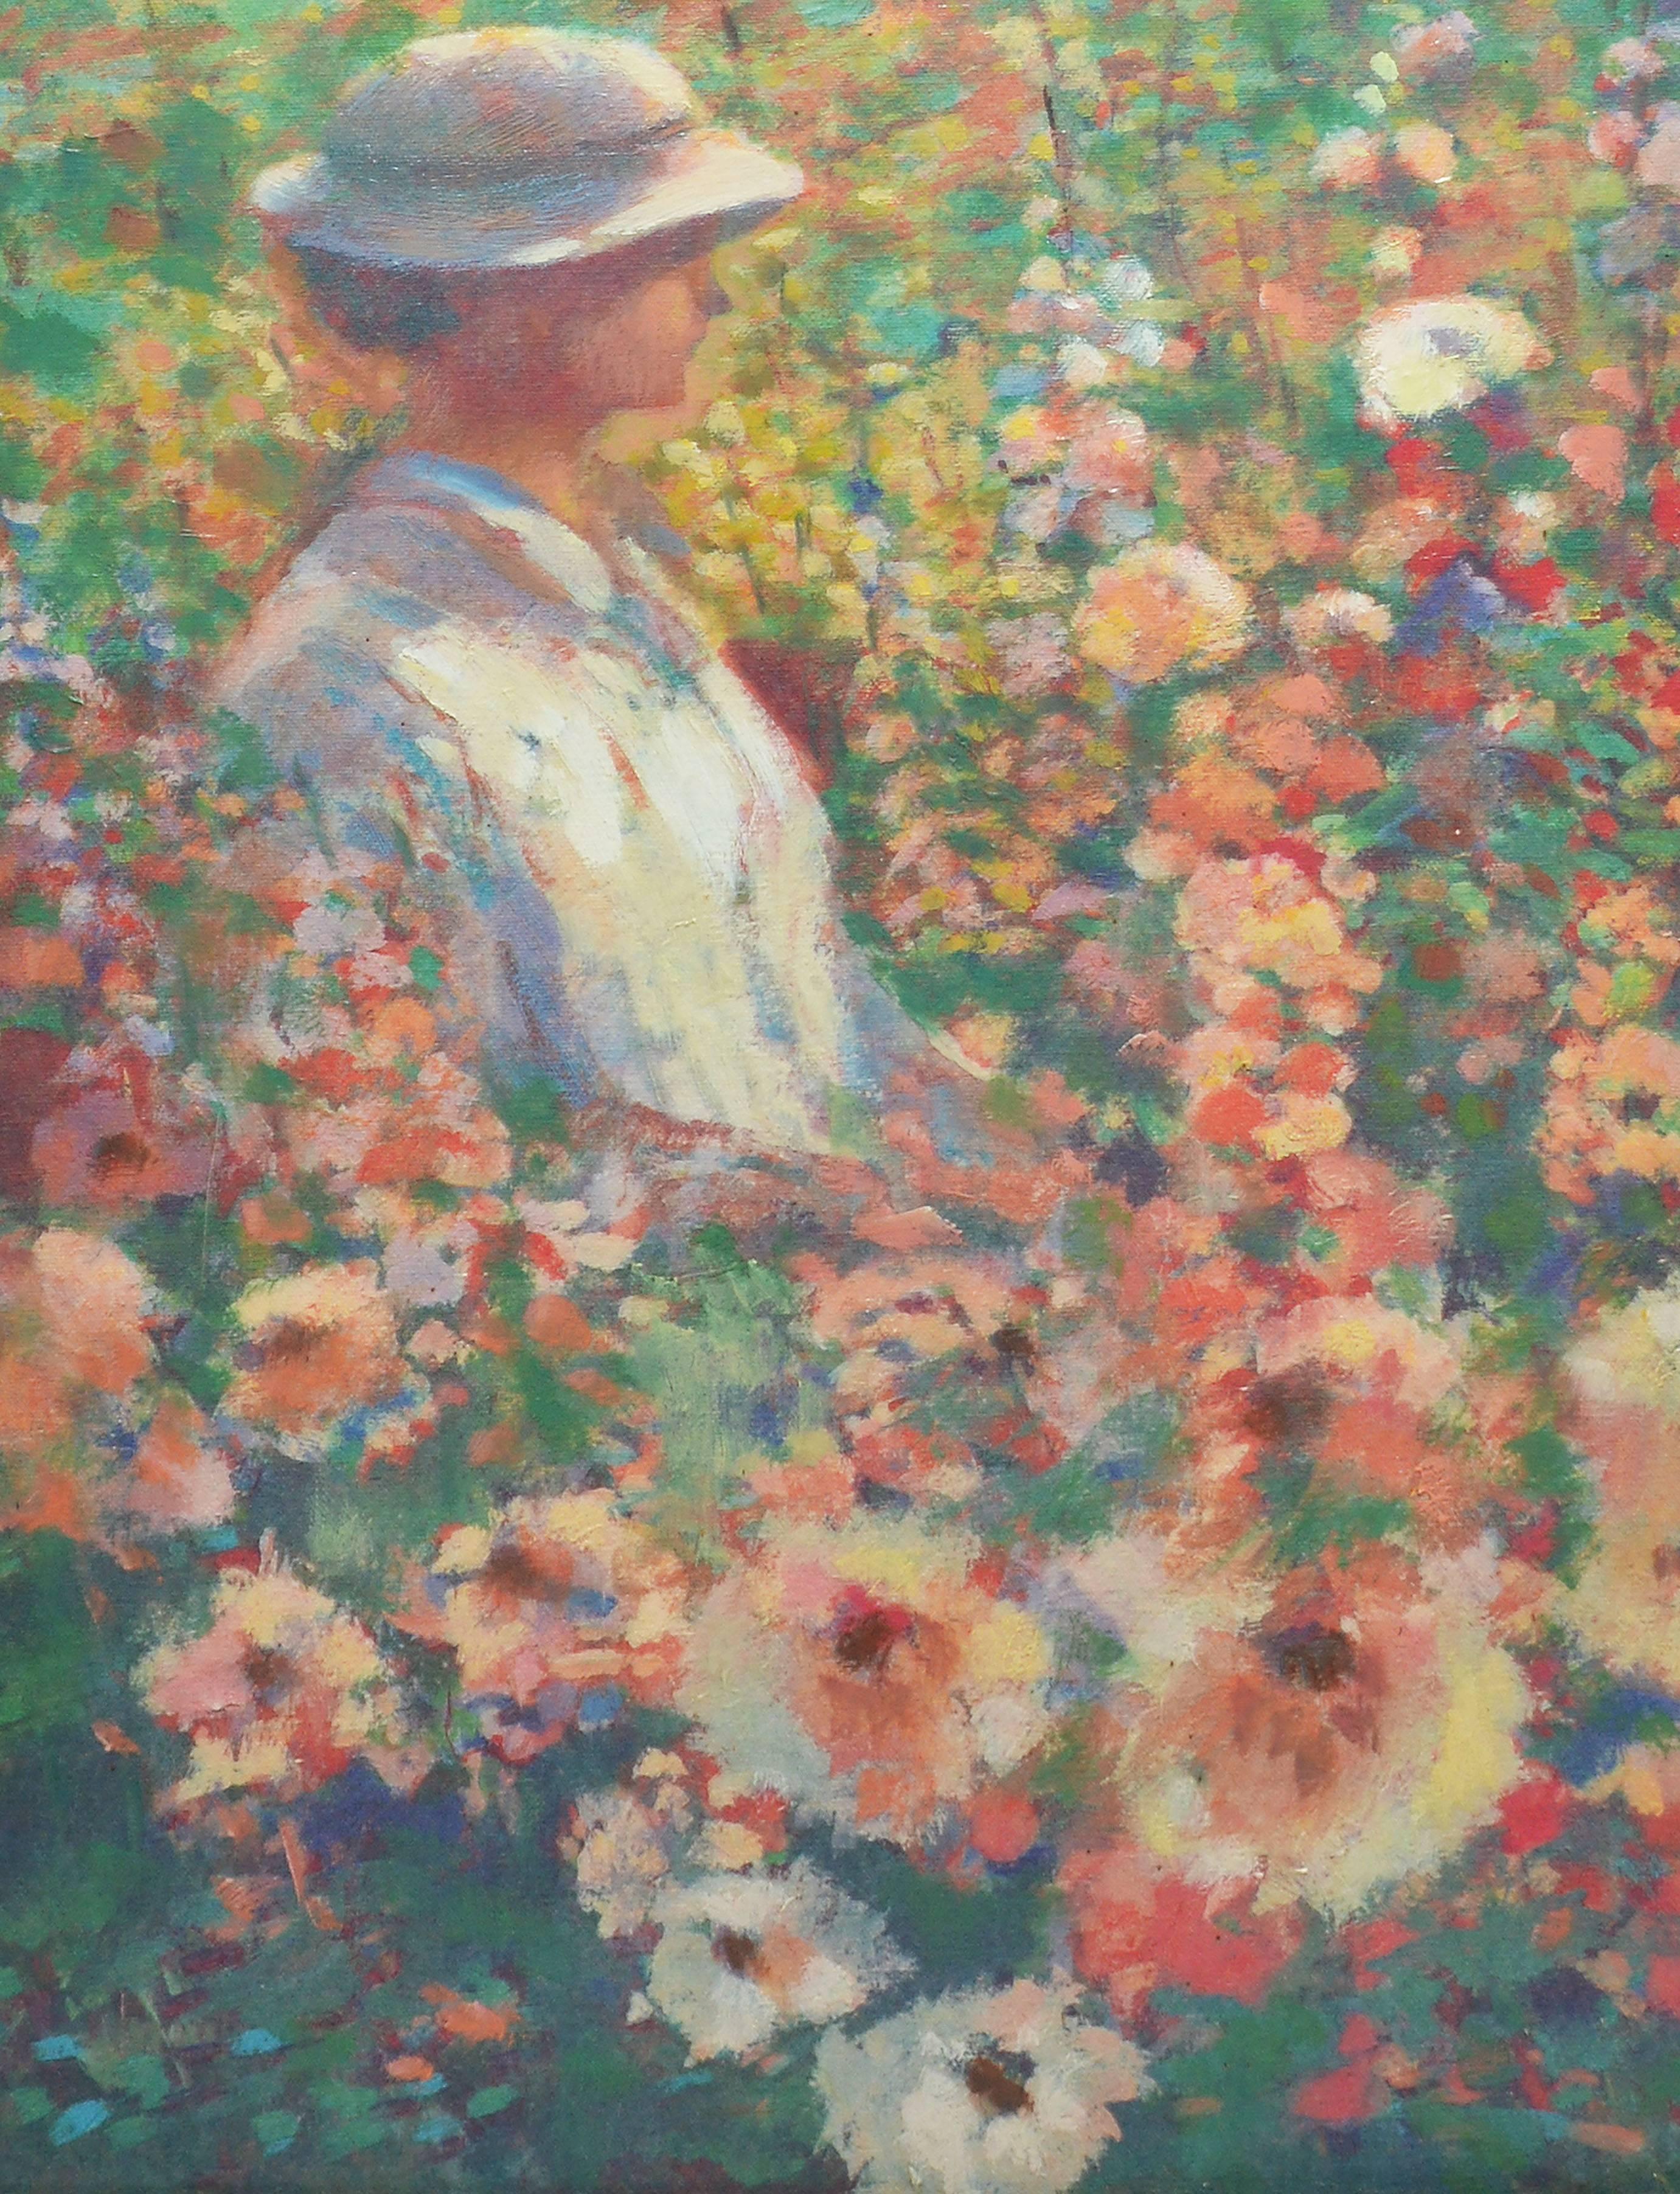 Portrait among the Hollyhocks, by Donald Roy Purdy 1